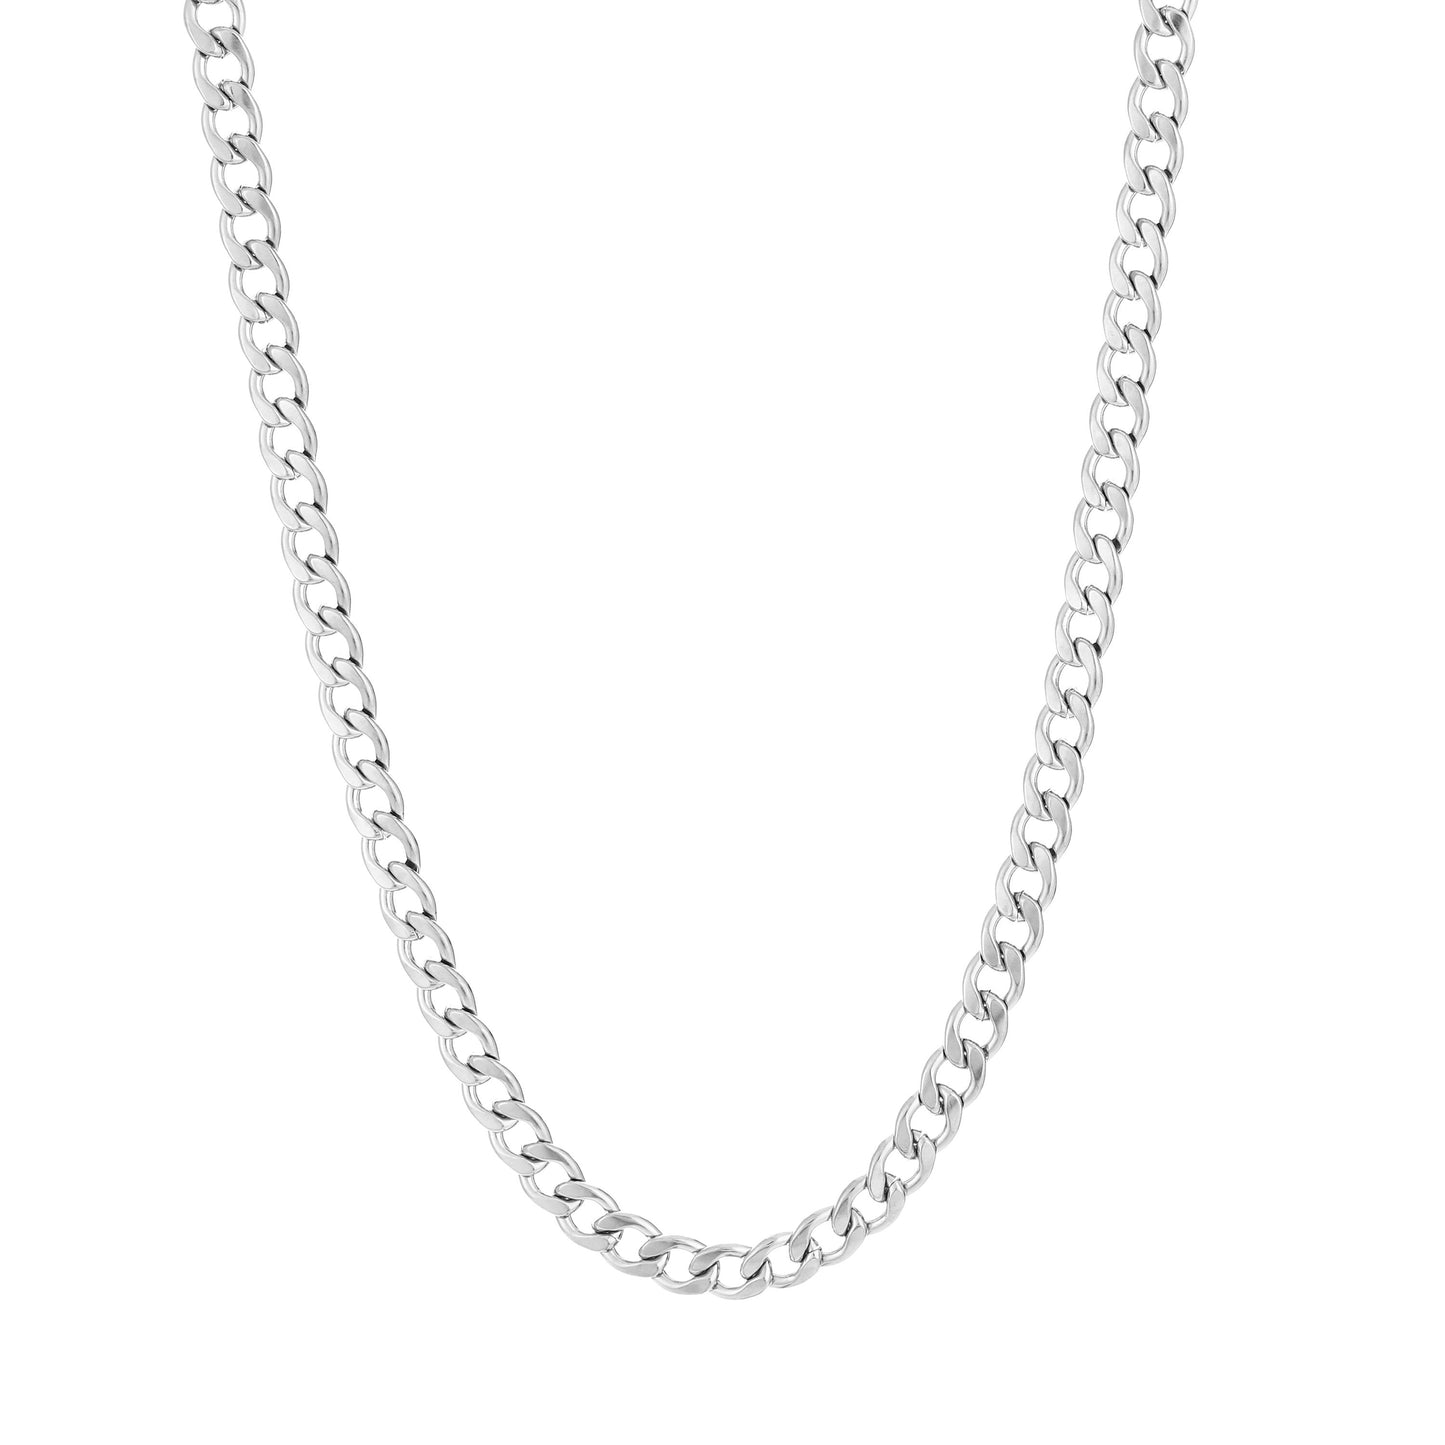 Chain 3.0 Necklace Silver